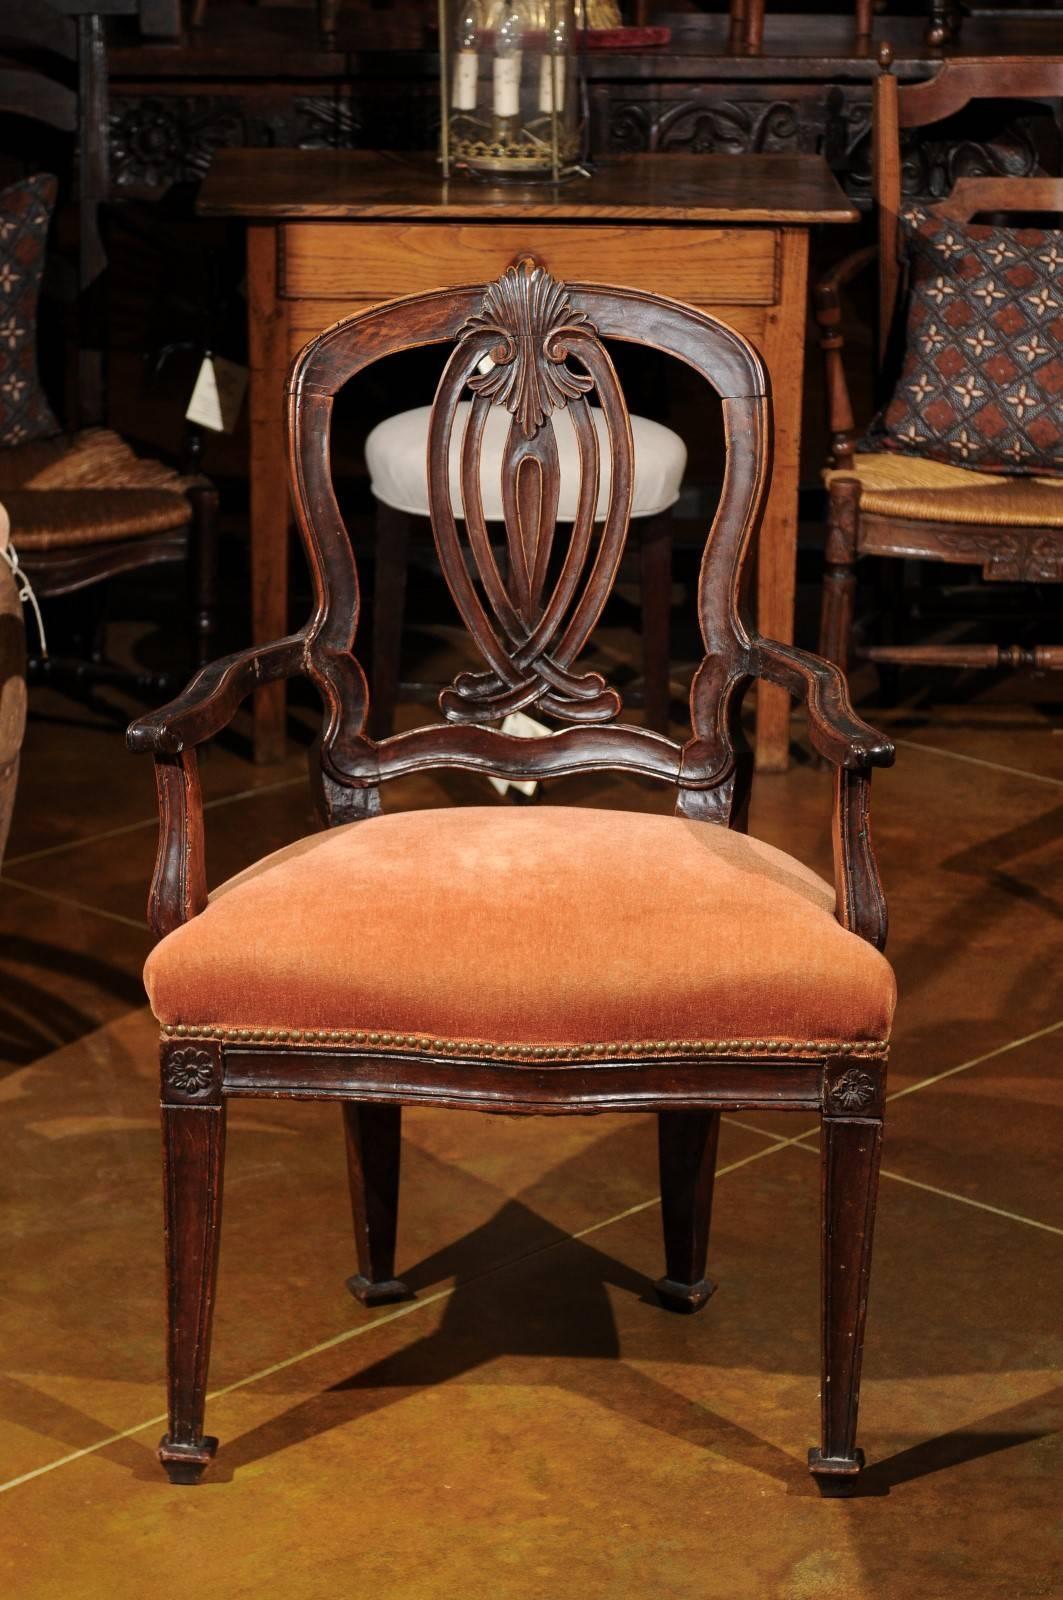 Upholstery Transitional Rococo / Neoclassical Armchair in Walnut, Italy, circa 1780 For Sale